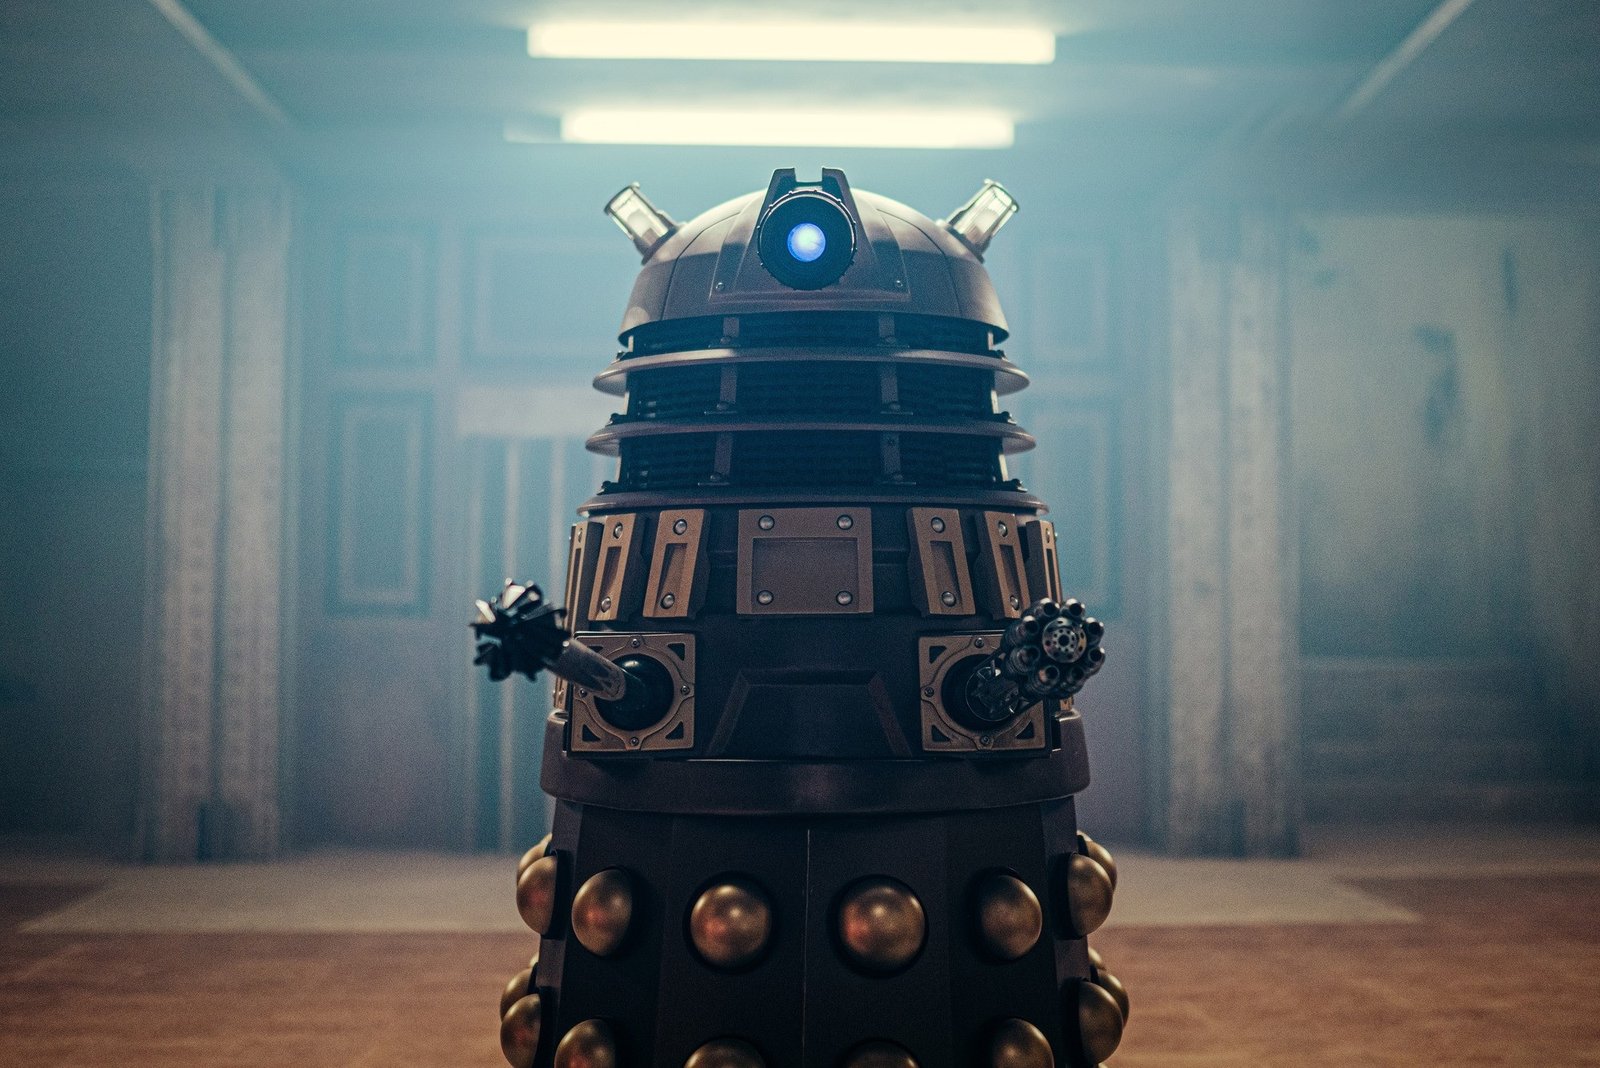 Chris Chibnall Reflects on Eve of the Daleks and the Upcoming 2022 Specials